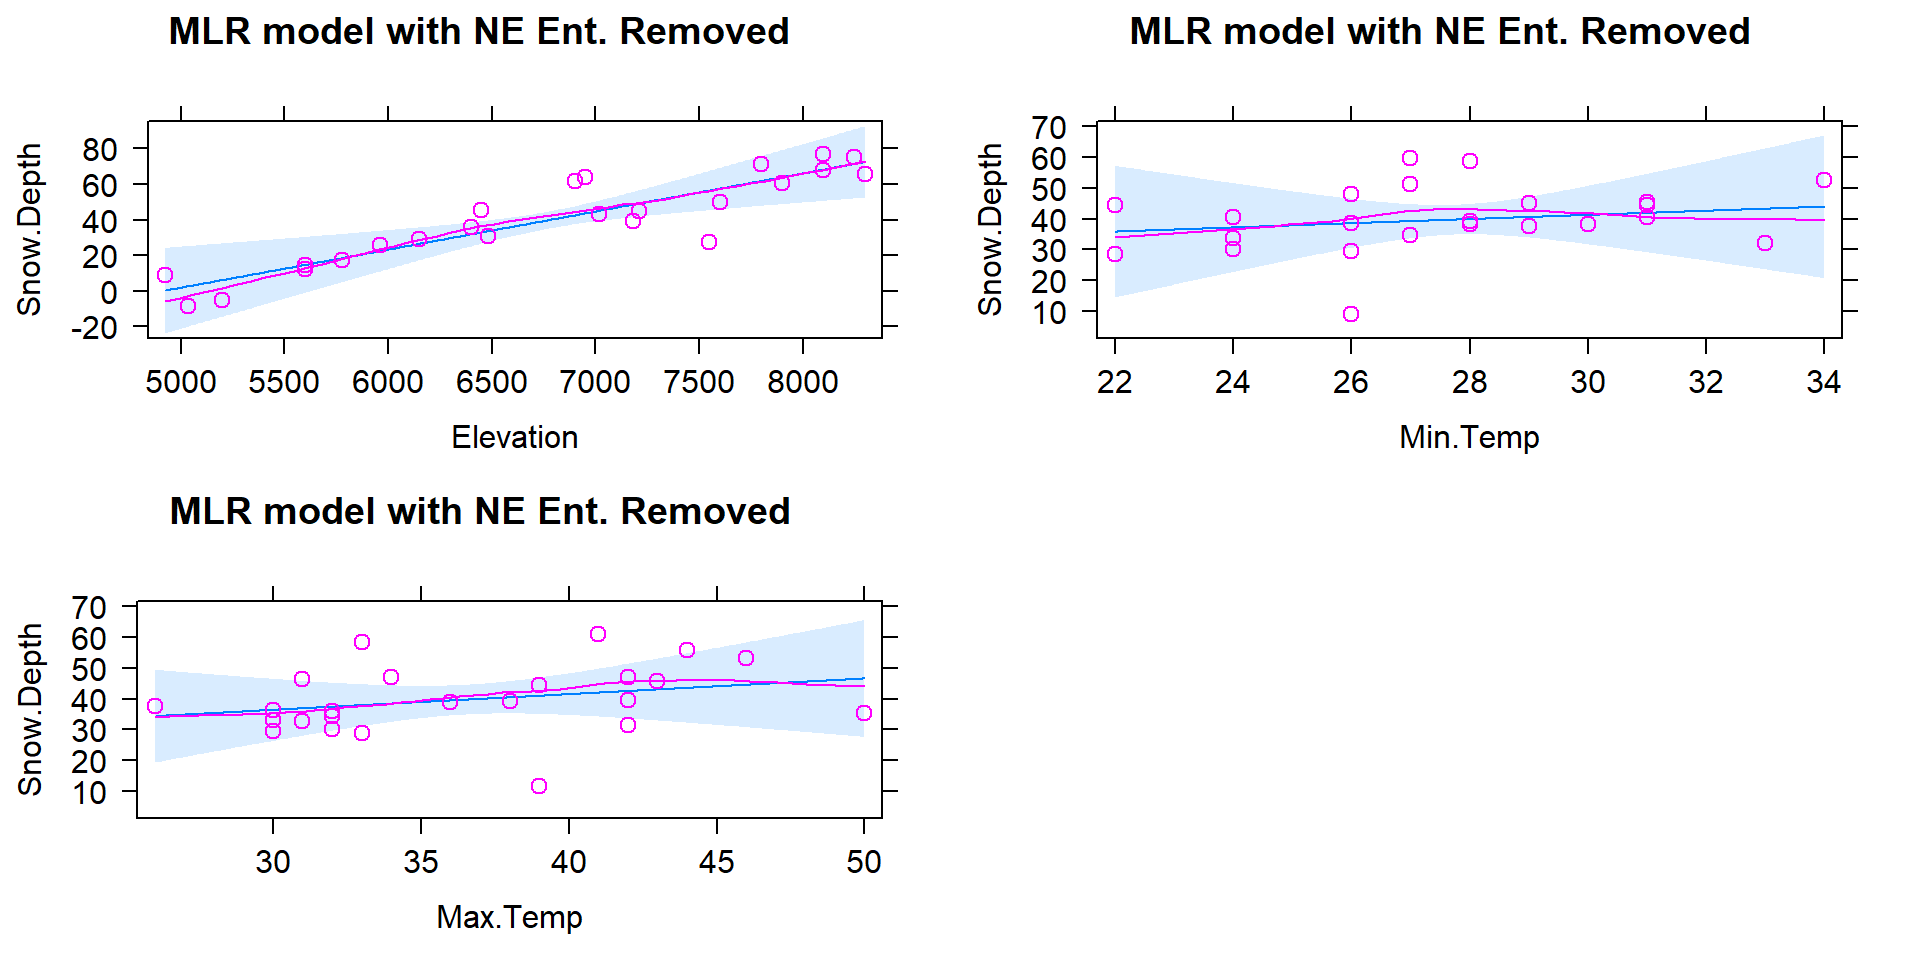 Term-plots for the MLR for Snow Depth based on Elevation, Min Temp, and Max Temp with Northeast entrance observation removed from data set (n=24).